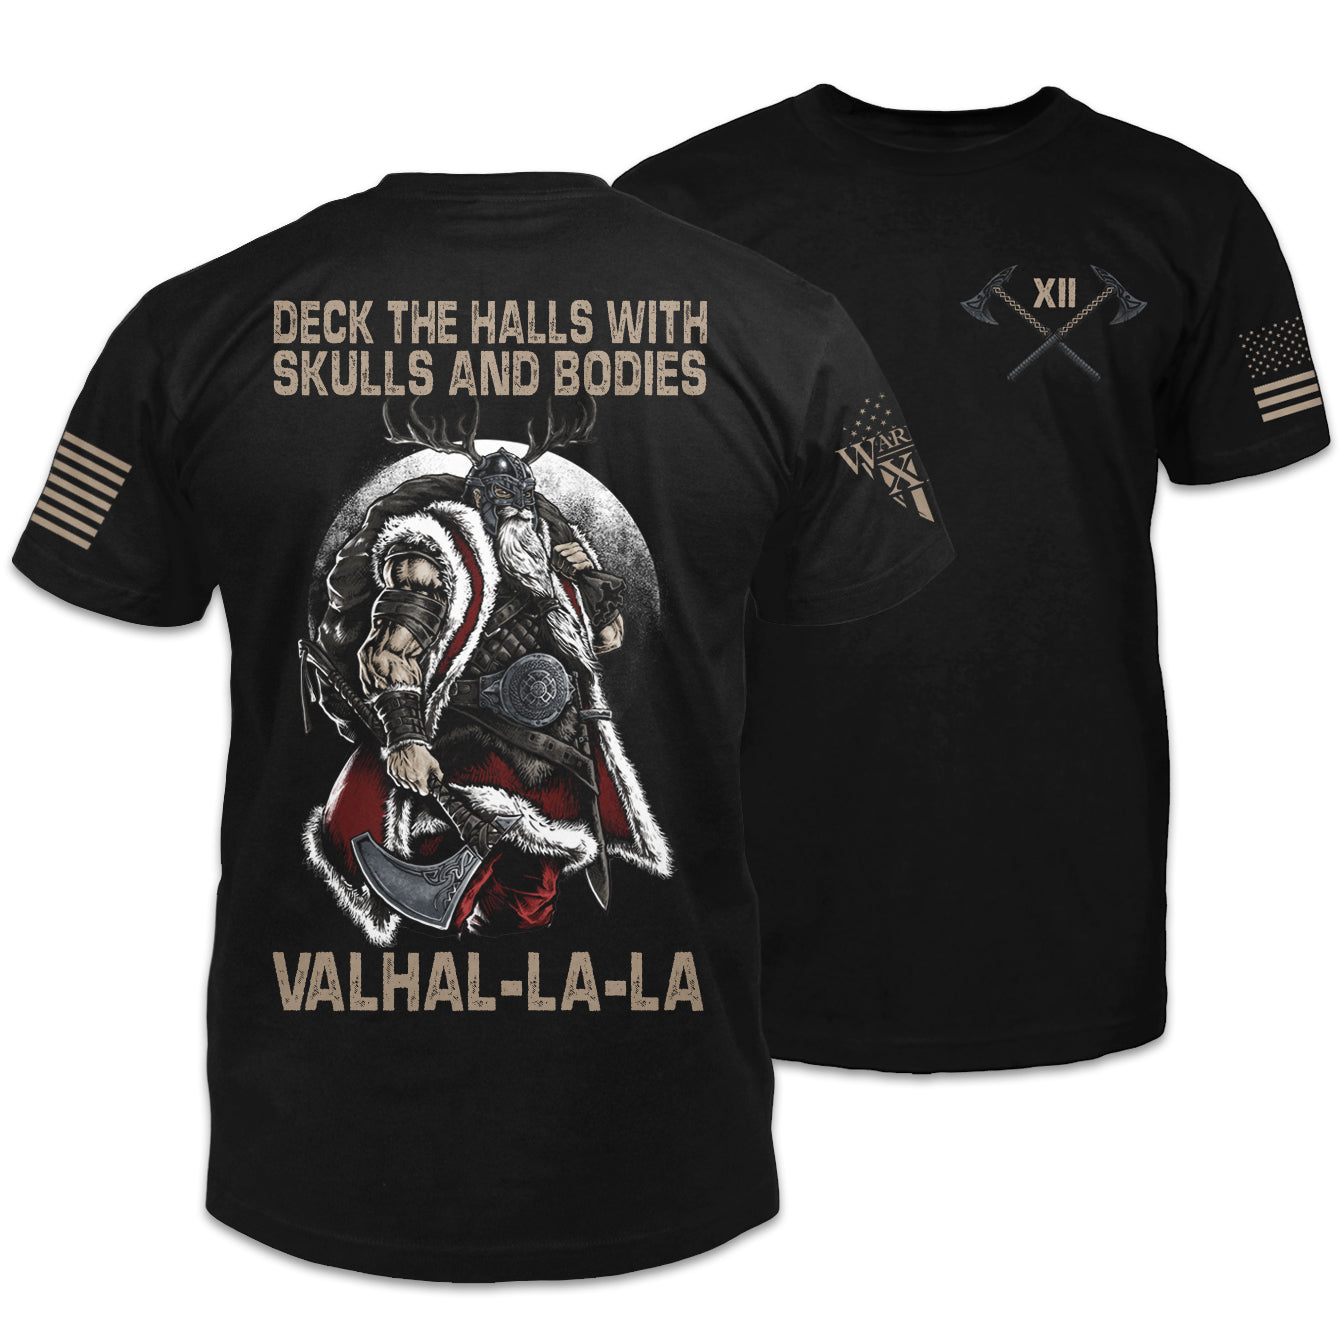 Front & back black t-shirt with the words "Deck the halls with skulls and bodies, Valhal-La-La" and a viking printed on the shirt.